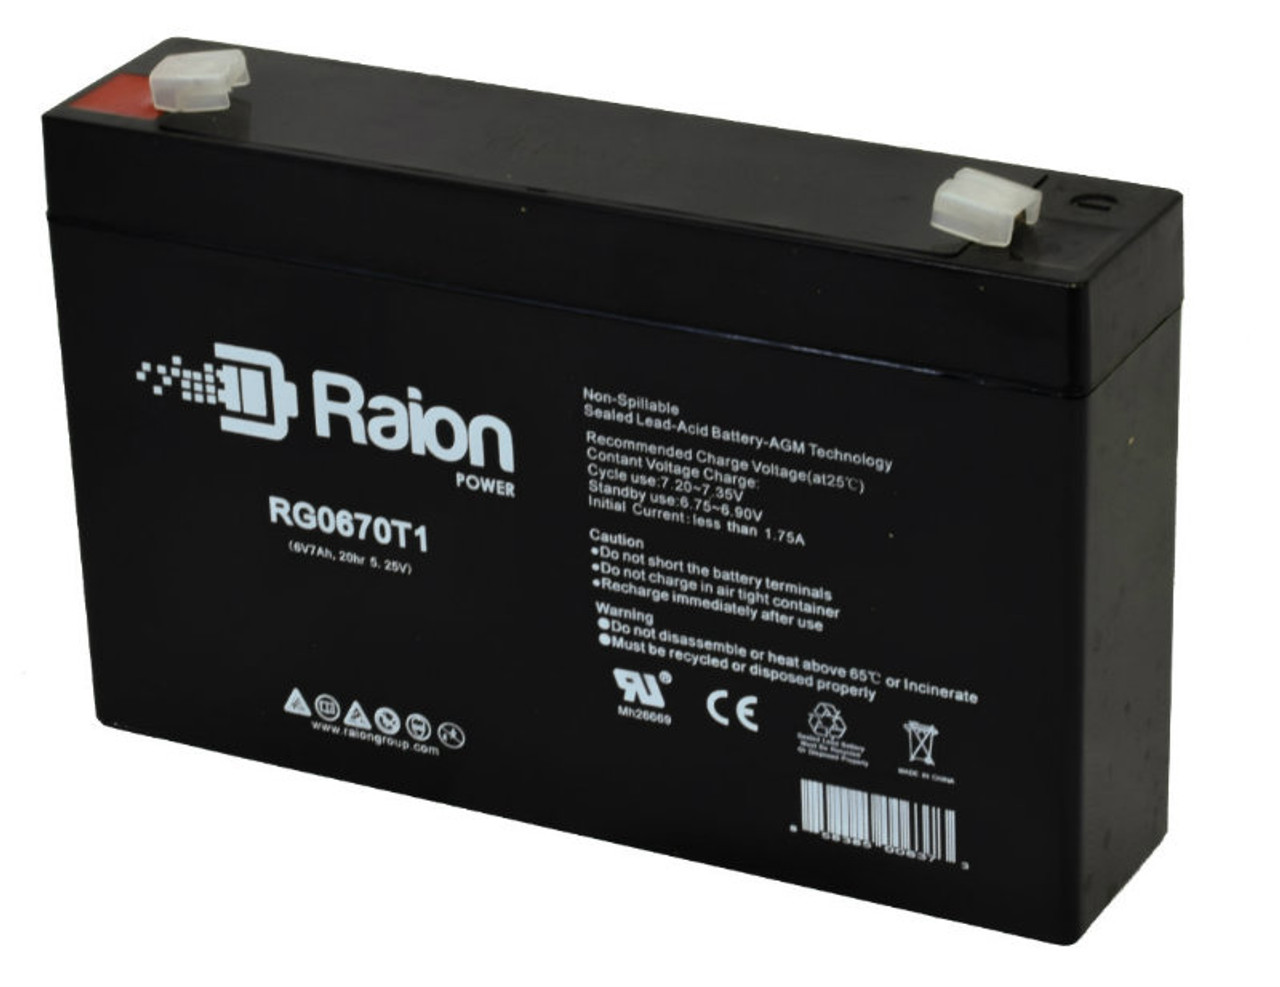 Raion Power RG0670T1 6V 7Ah Replacement Emergency Lighting Battery for IBT BT2.8-12L